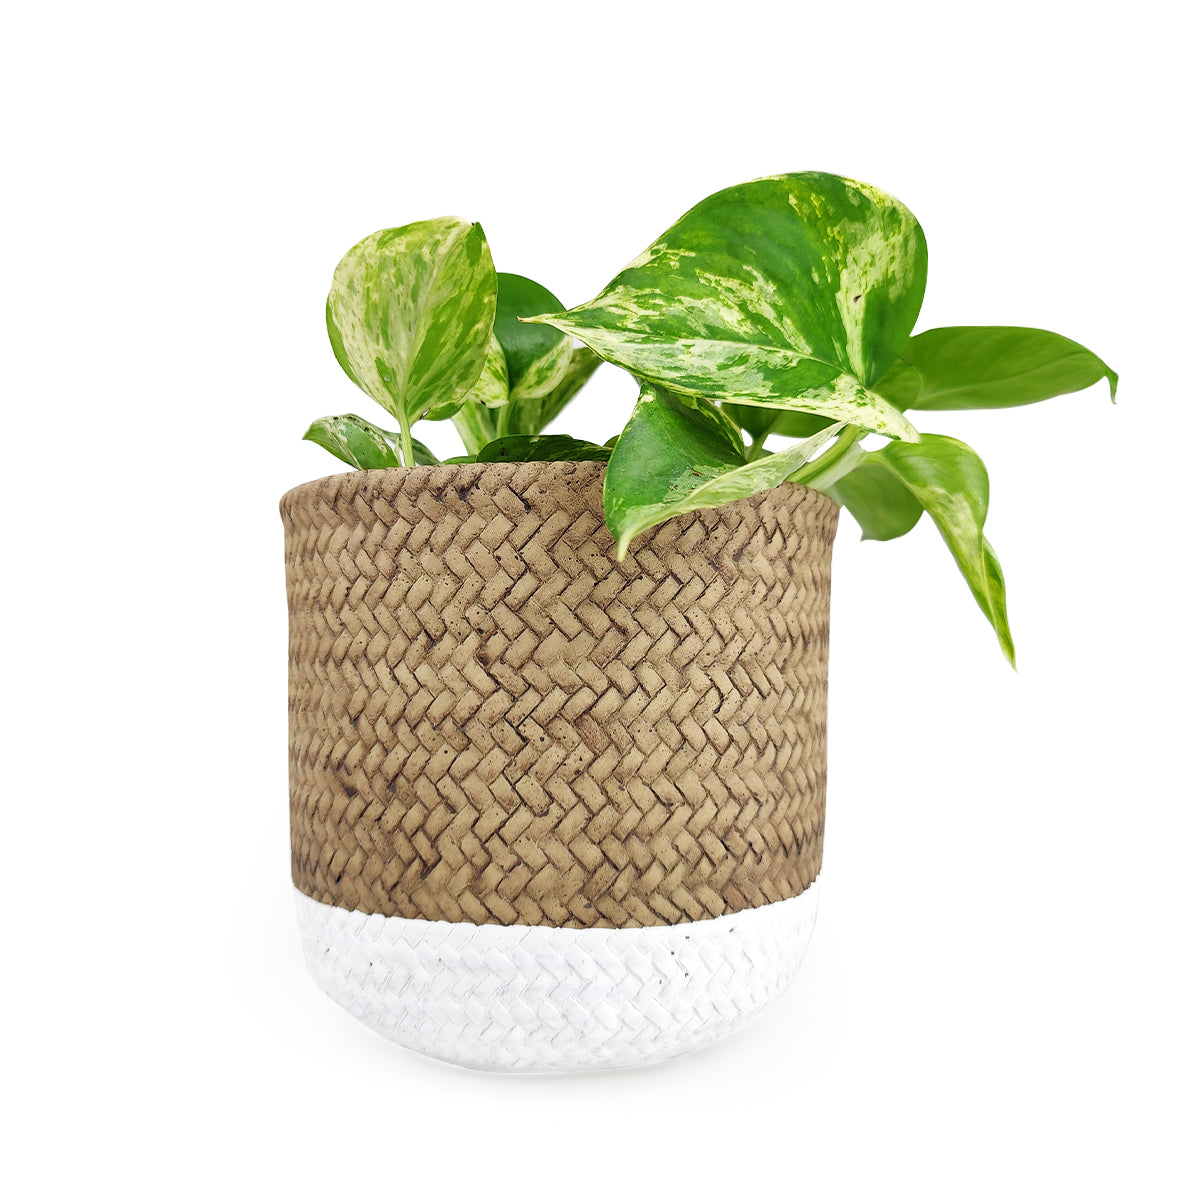 6 inch planter, round planter for sale, cement planter, cement plant pot, basket design planter, 6 inch pot for indoor houseplant, hand-crafted planter, plant pot with drainage hole